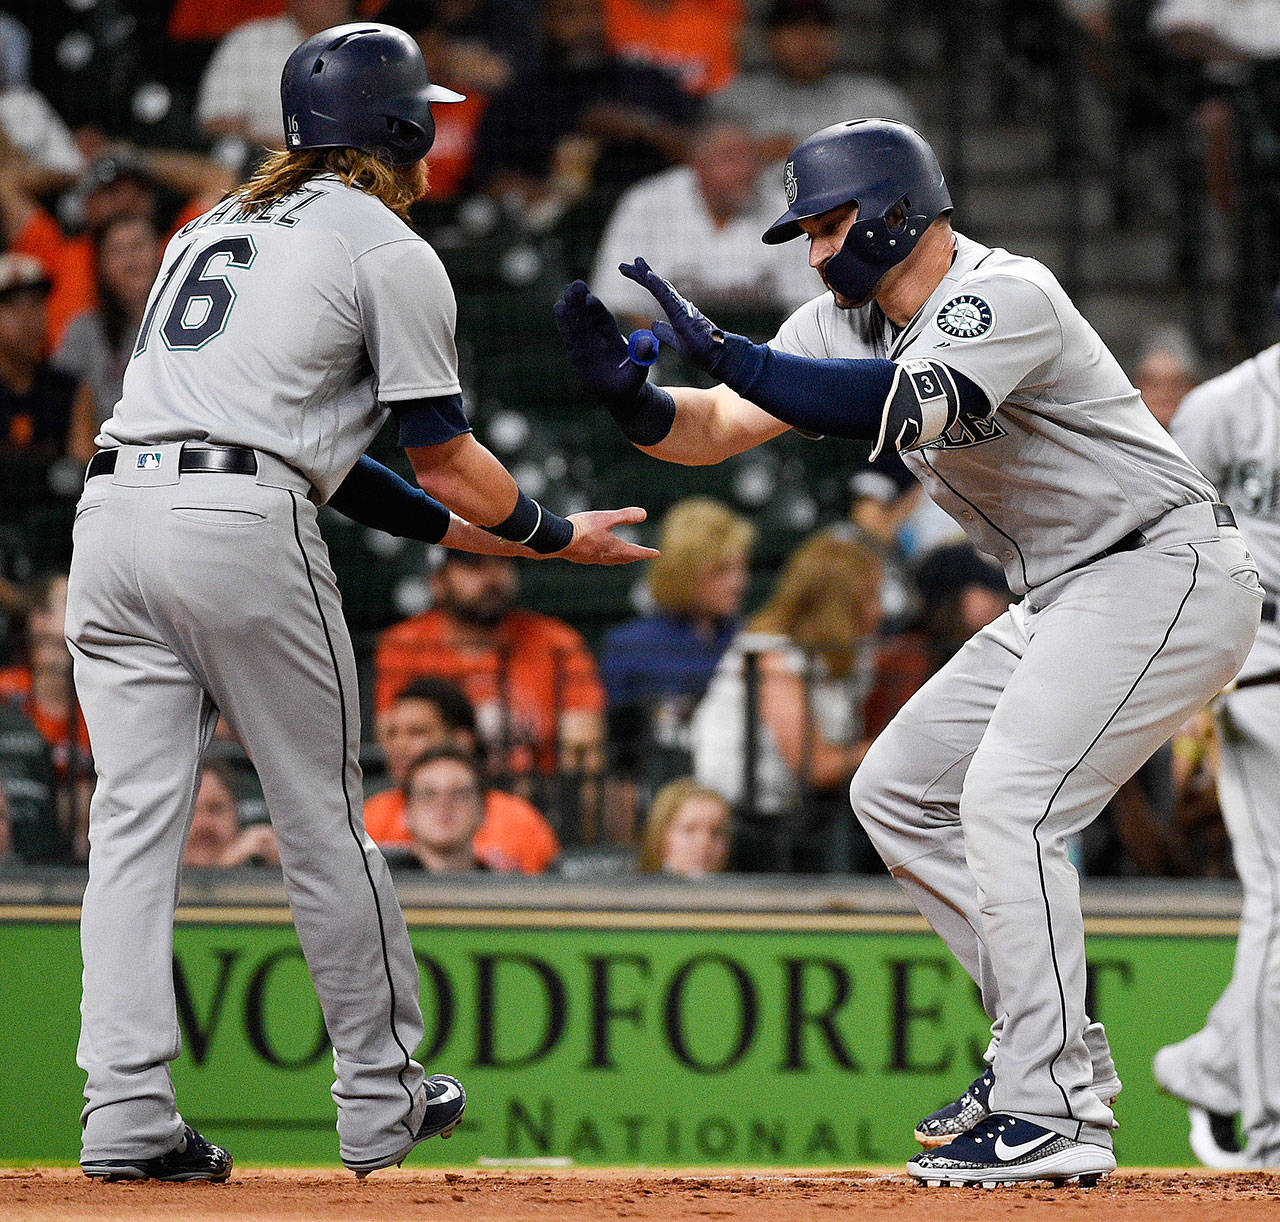 The Mariners’ Mike Zunino (right) celebrates his two-run home run with Ben Gamel during the second inning of a game against the Astros on June 5, 2018, in Houston. (AP Photo/Eric Christian Smith)